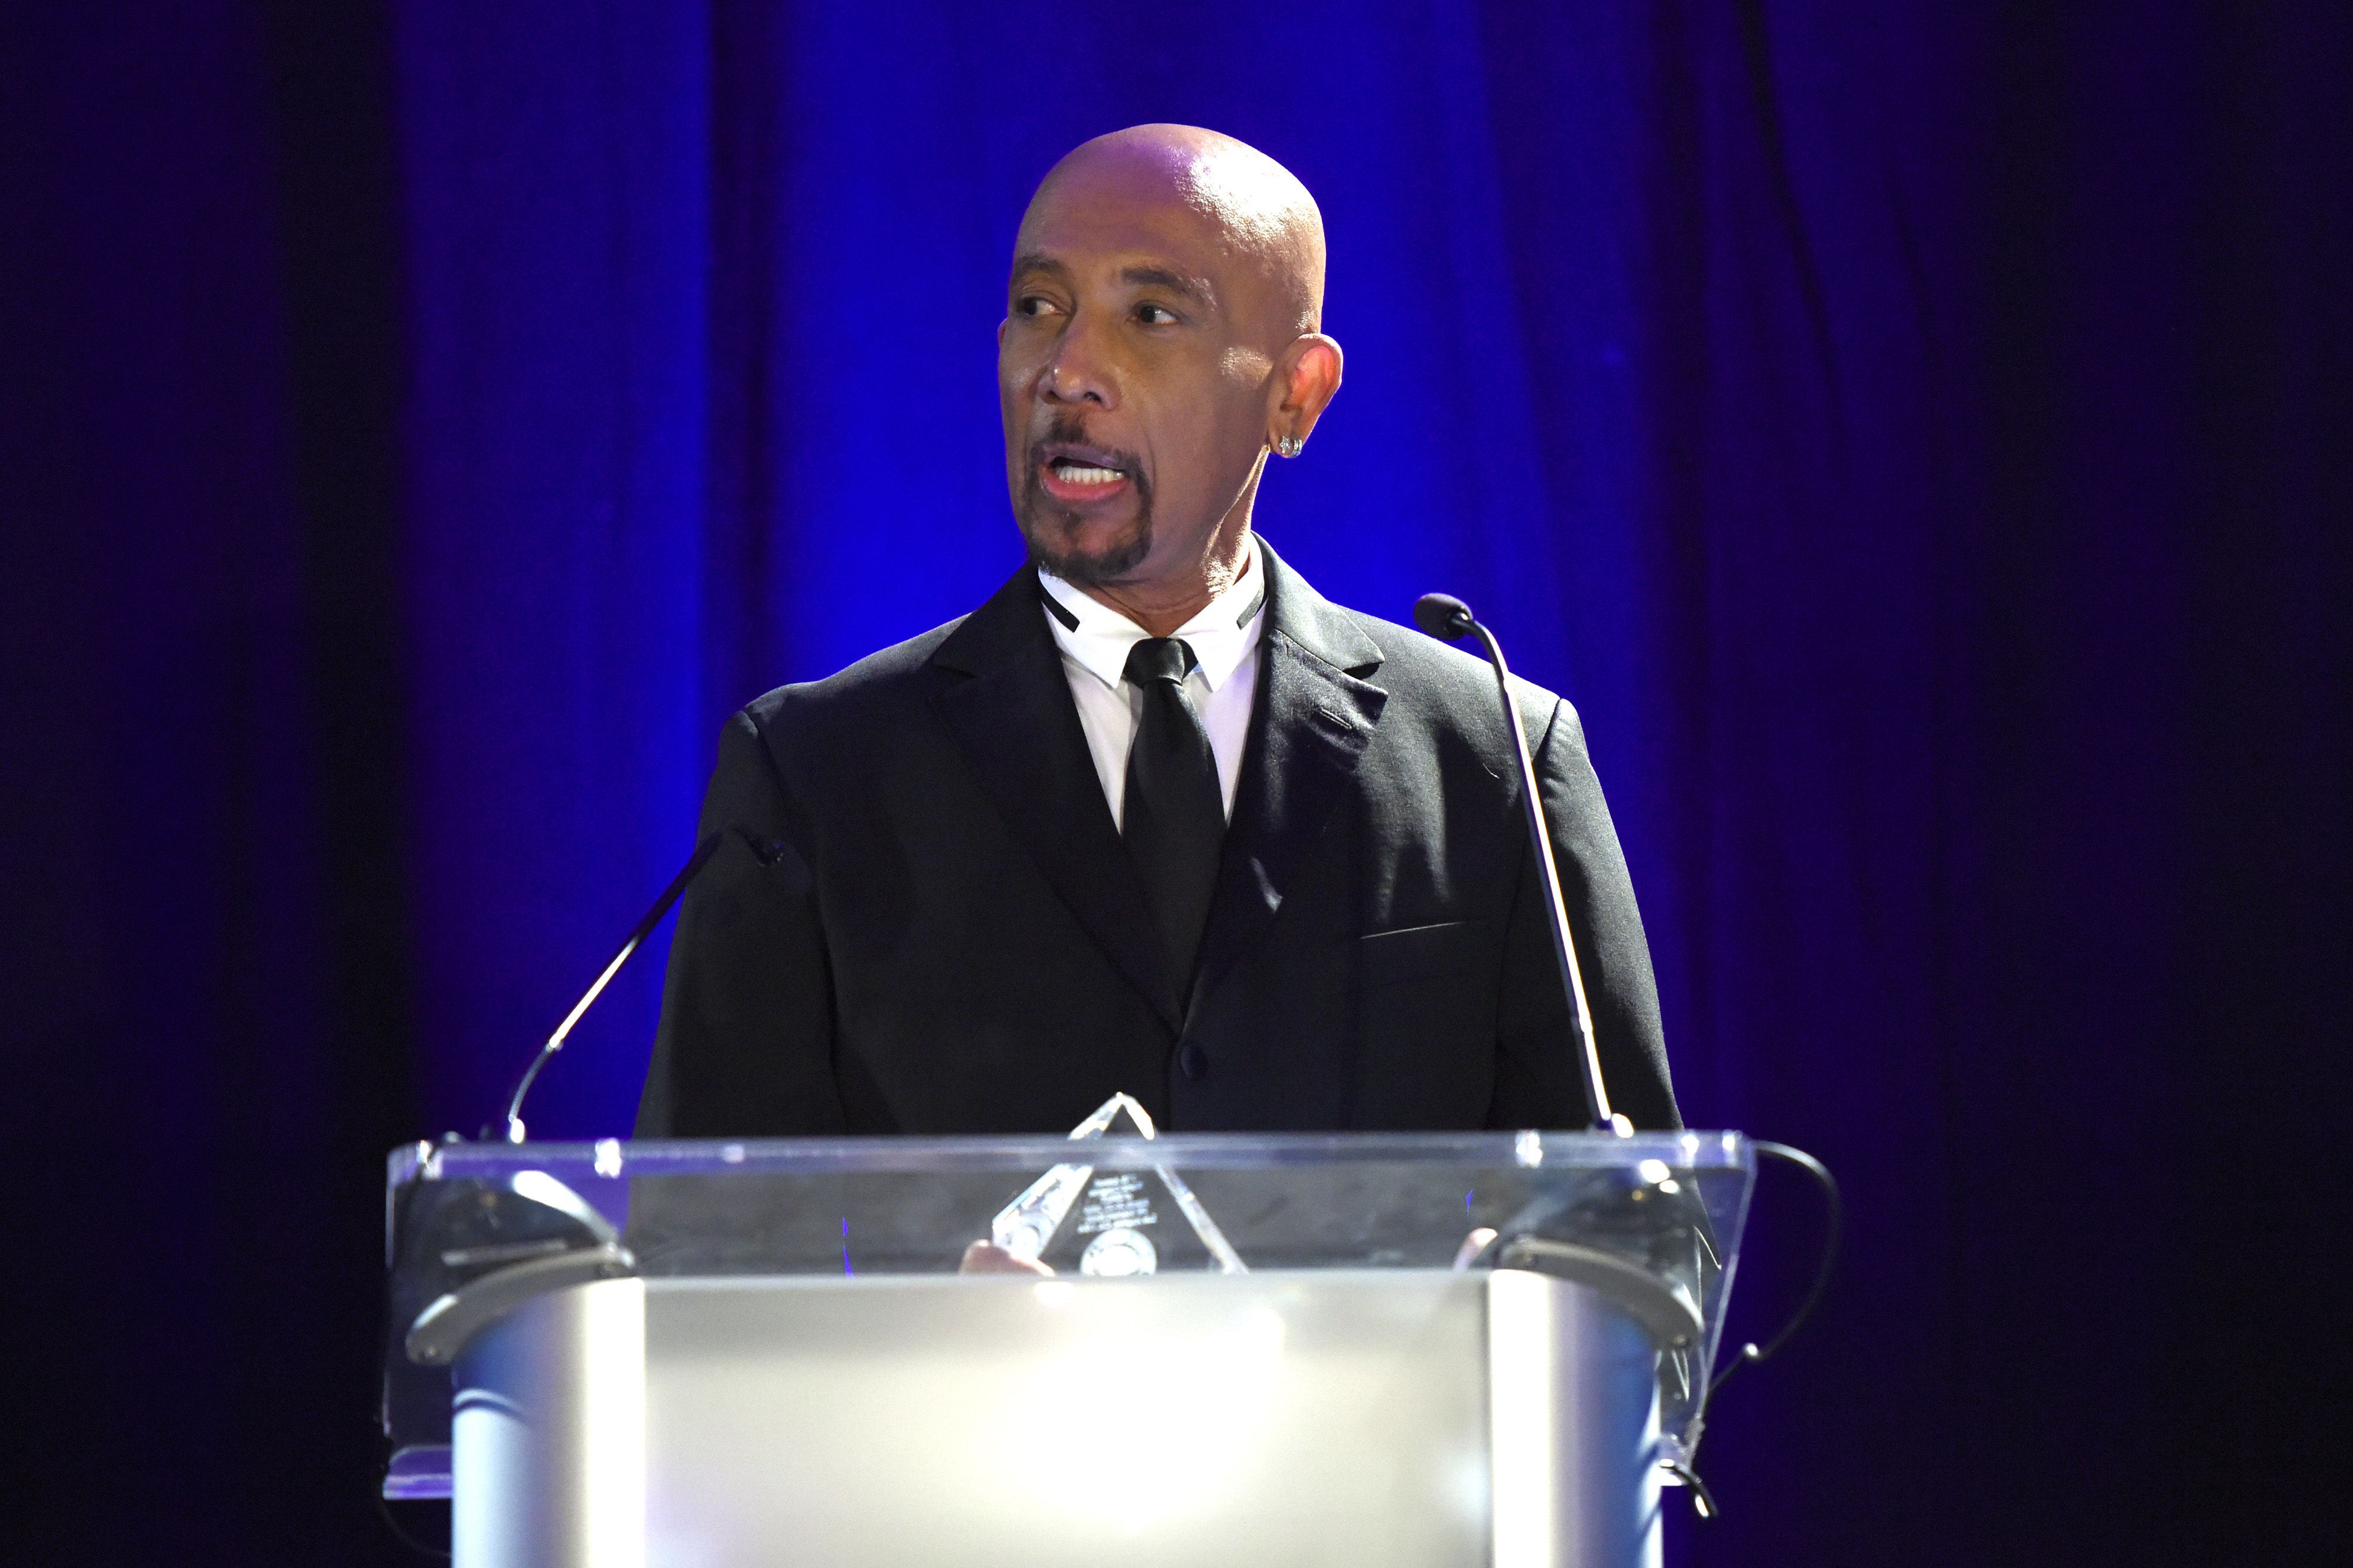 Montel Williams speaks at the “Gathering for Cure” Awards Gala for the Brain Mapping Foundation on Saturday, July 10, in Los Angeles.